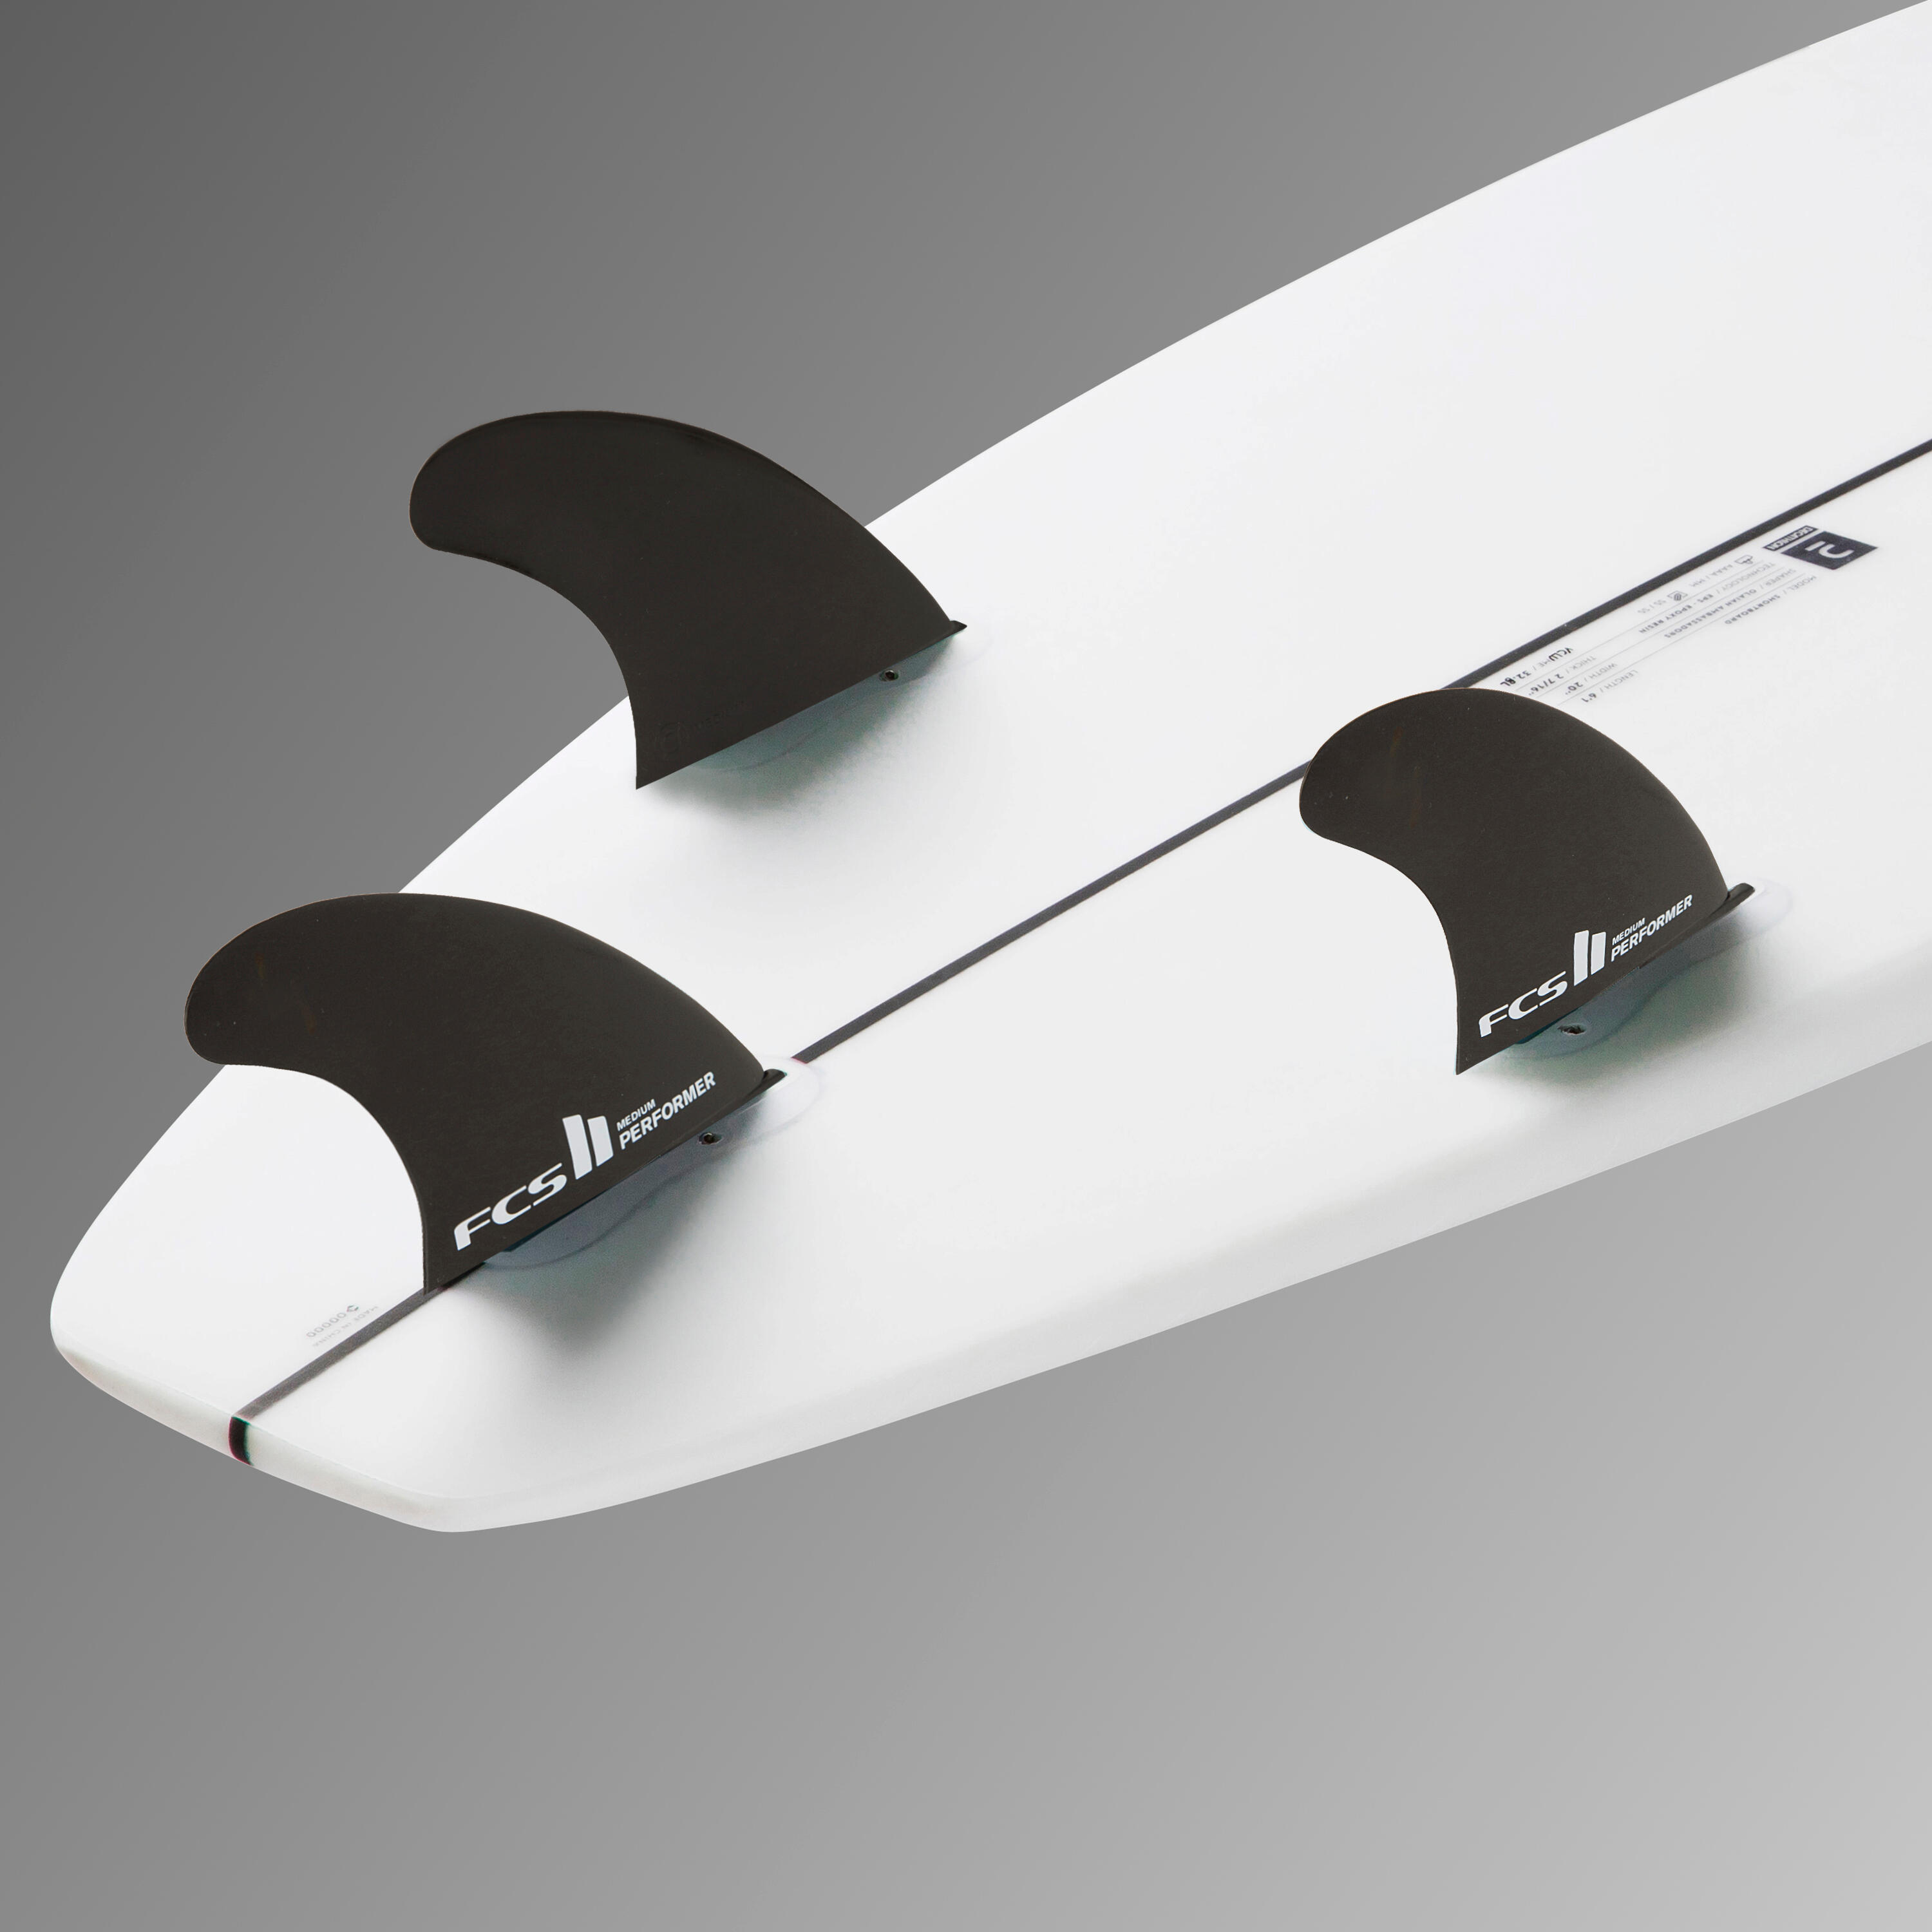 SHORTBOARD 900 6'3" 35 L. Supplied with 3 FCS2 fins 10/13